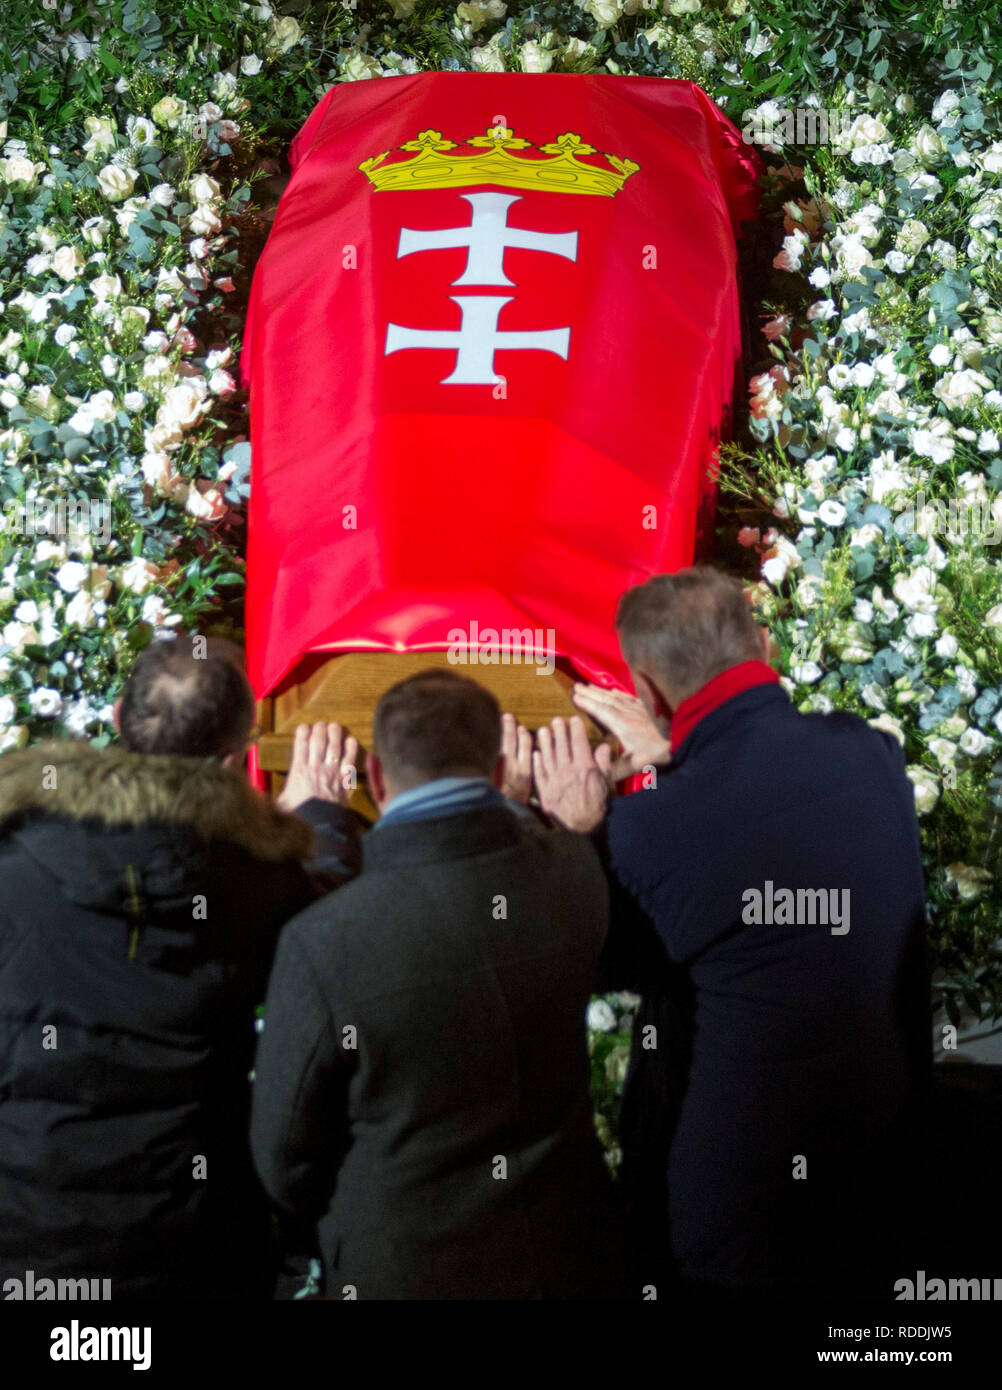 Gdansk, Poland. 17th January, 2019. The coffin of Pawel Adamowicz lays in the European Solidarity Centre as the public pass and give respects on January 17, 2019 in Gdansk, Poland  Pawel Adamowicz stabbed to death during a charity event on Sunday. Credit: East News sp. z o.o./Alamy Live News Stock Photo